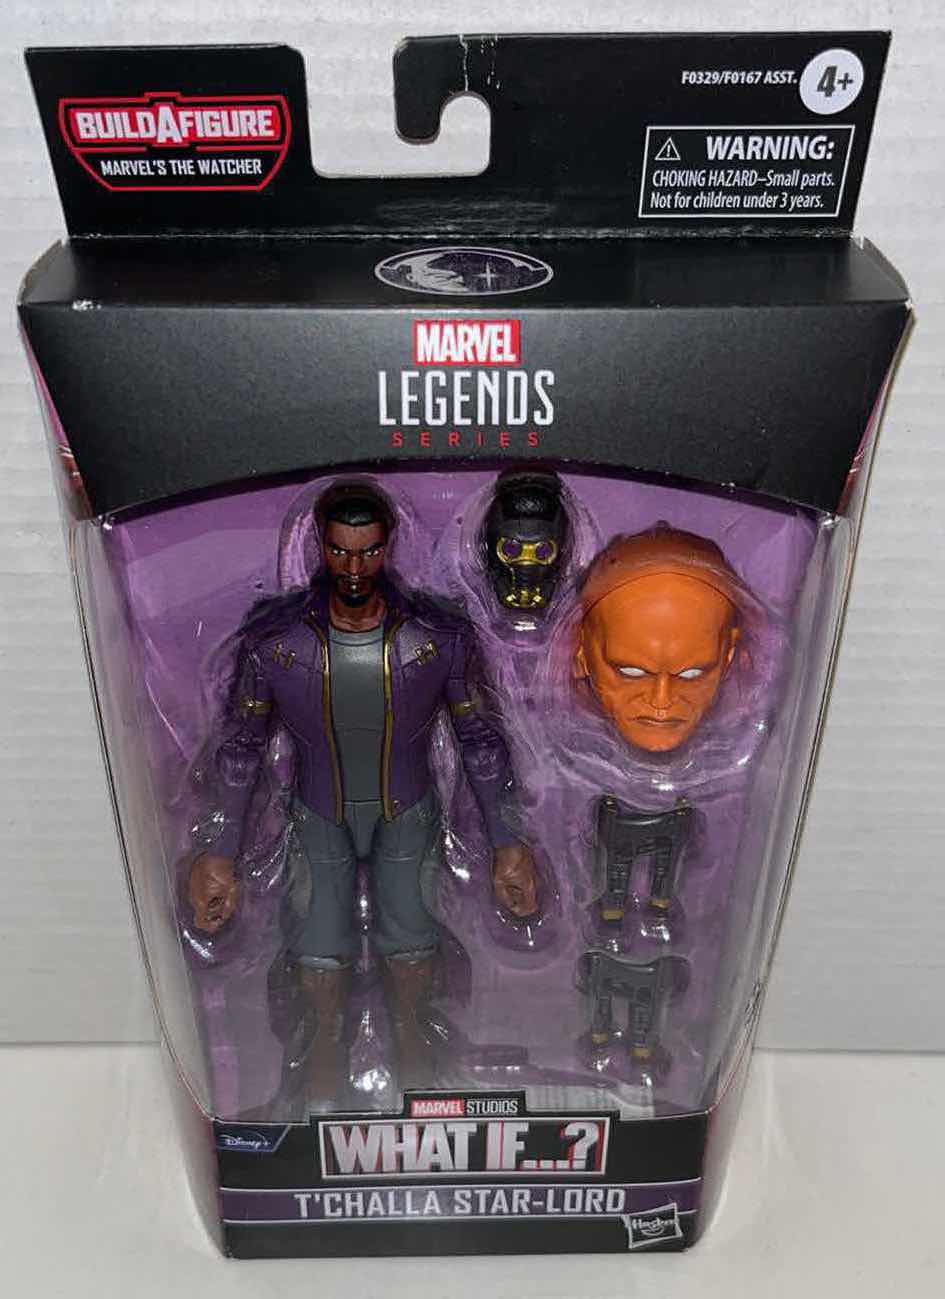 Photo 1 of NEW HASBRO MARVEL LEGEND SERIES ACTION FIGURE & ACCESSORIES, MARVEL STUDIOS WHAT IF? “T’CHALLA STAR-LORD” $26.00 (1)